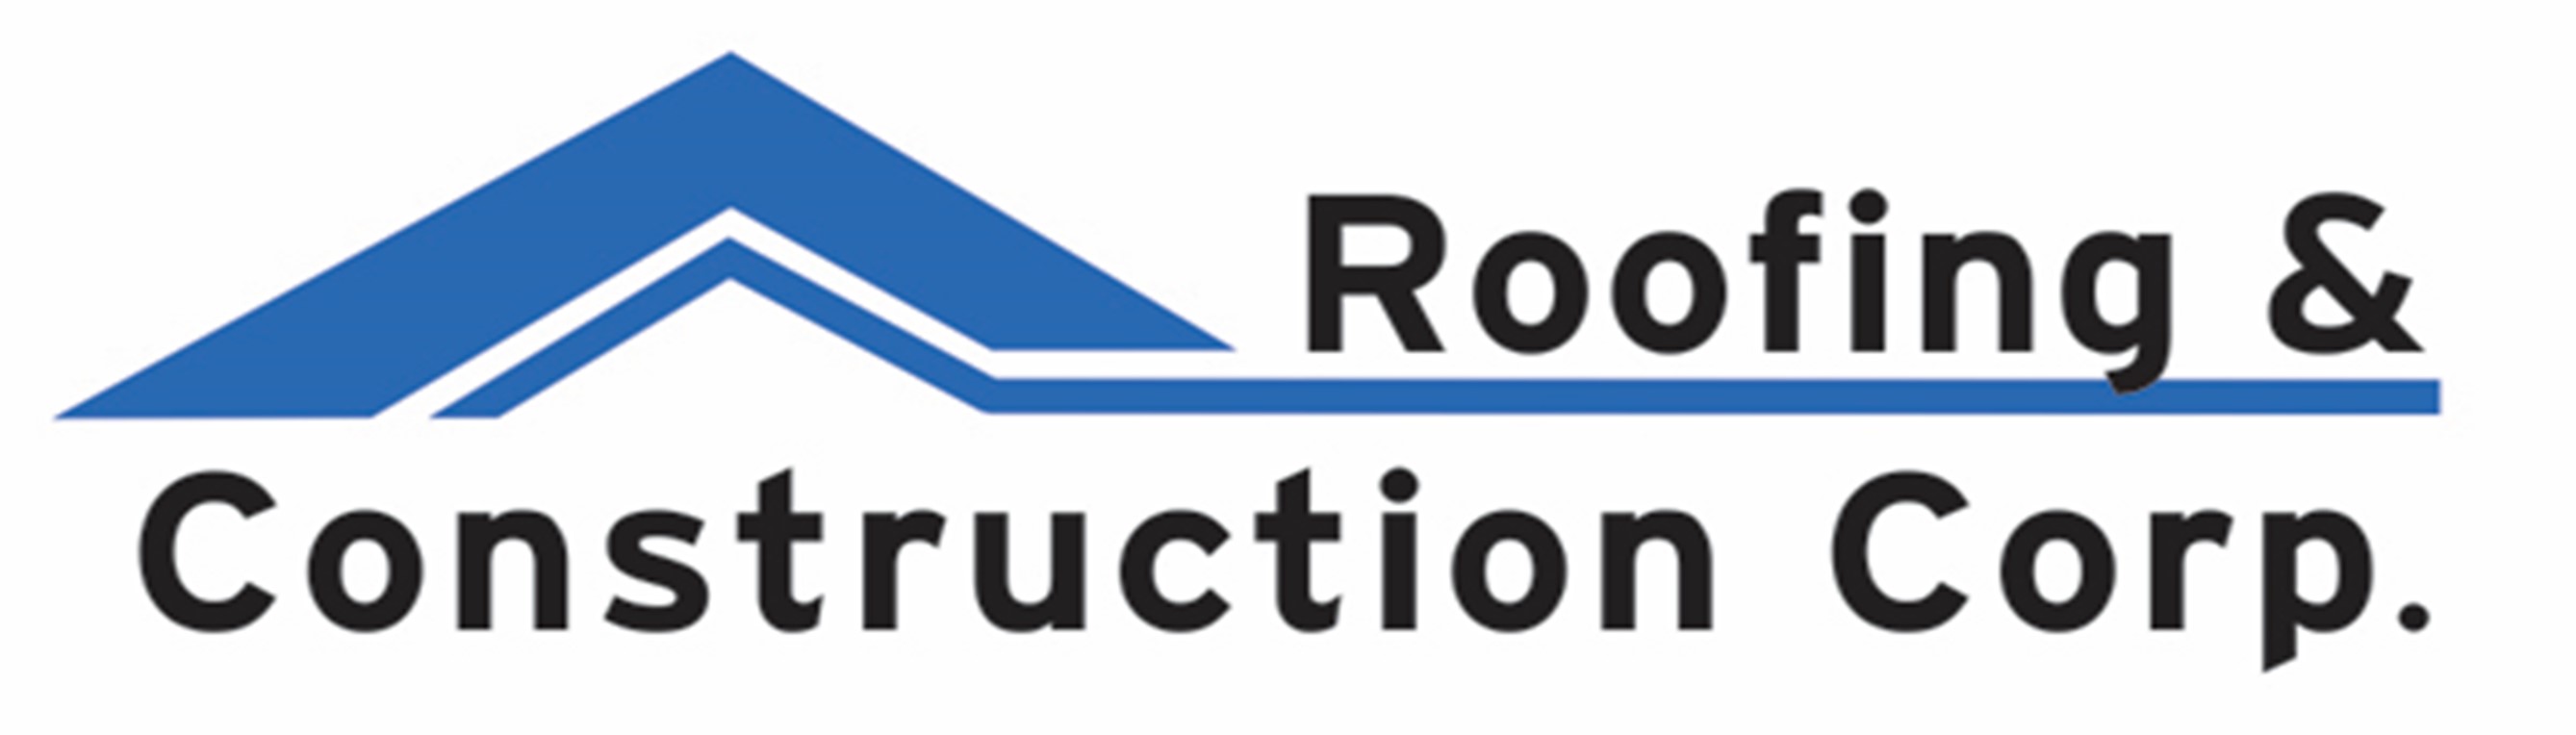 Roofing and Construction Corp. Logo